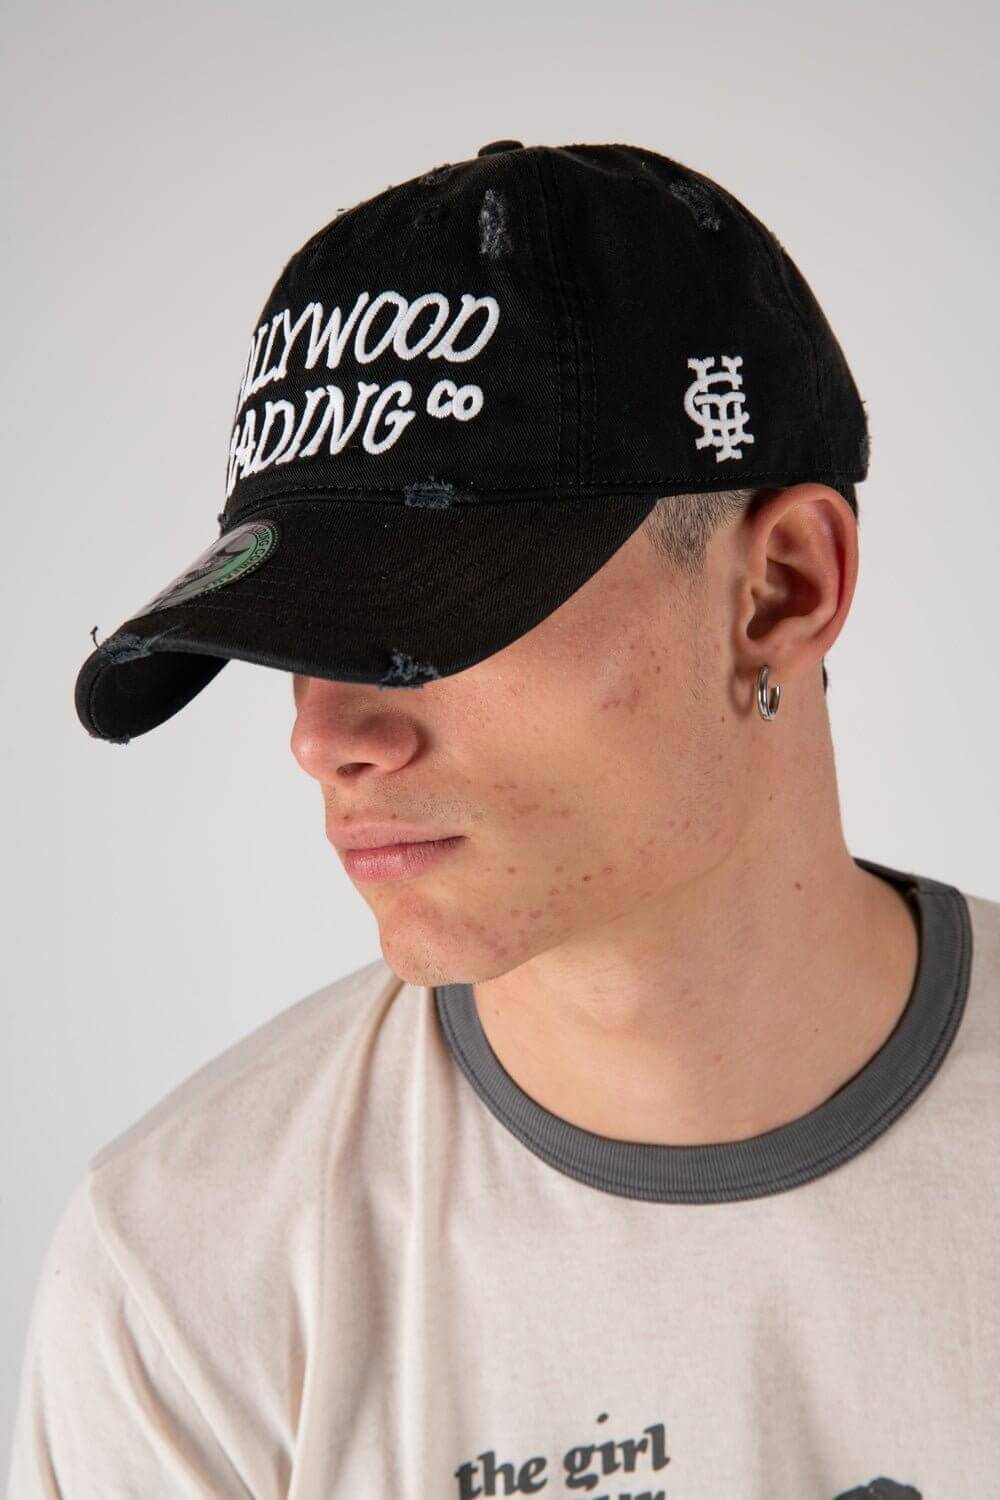 HOLLYWOOD T.C. BLK CAP Baseball cap with preformed peak, round crown with eyelets, Hollywood TC embroidered on the front, adjustable strap on the back. One size fits all. 100% cotton. HTC LOS ANGELES